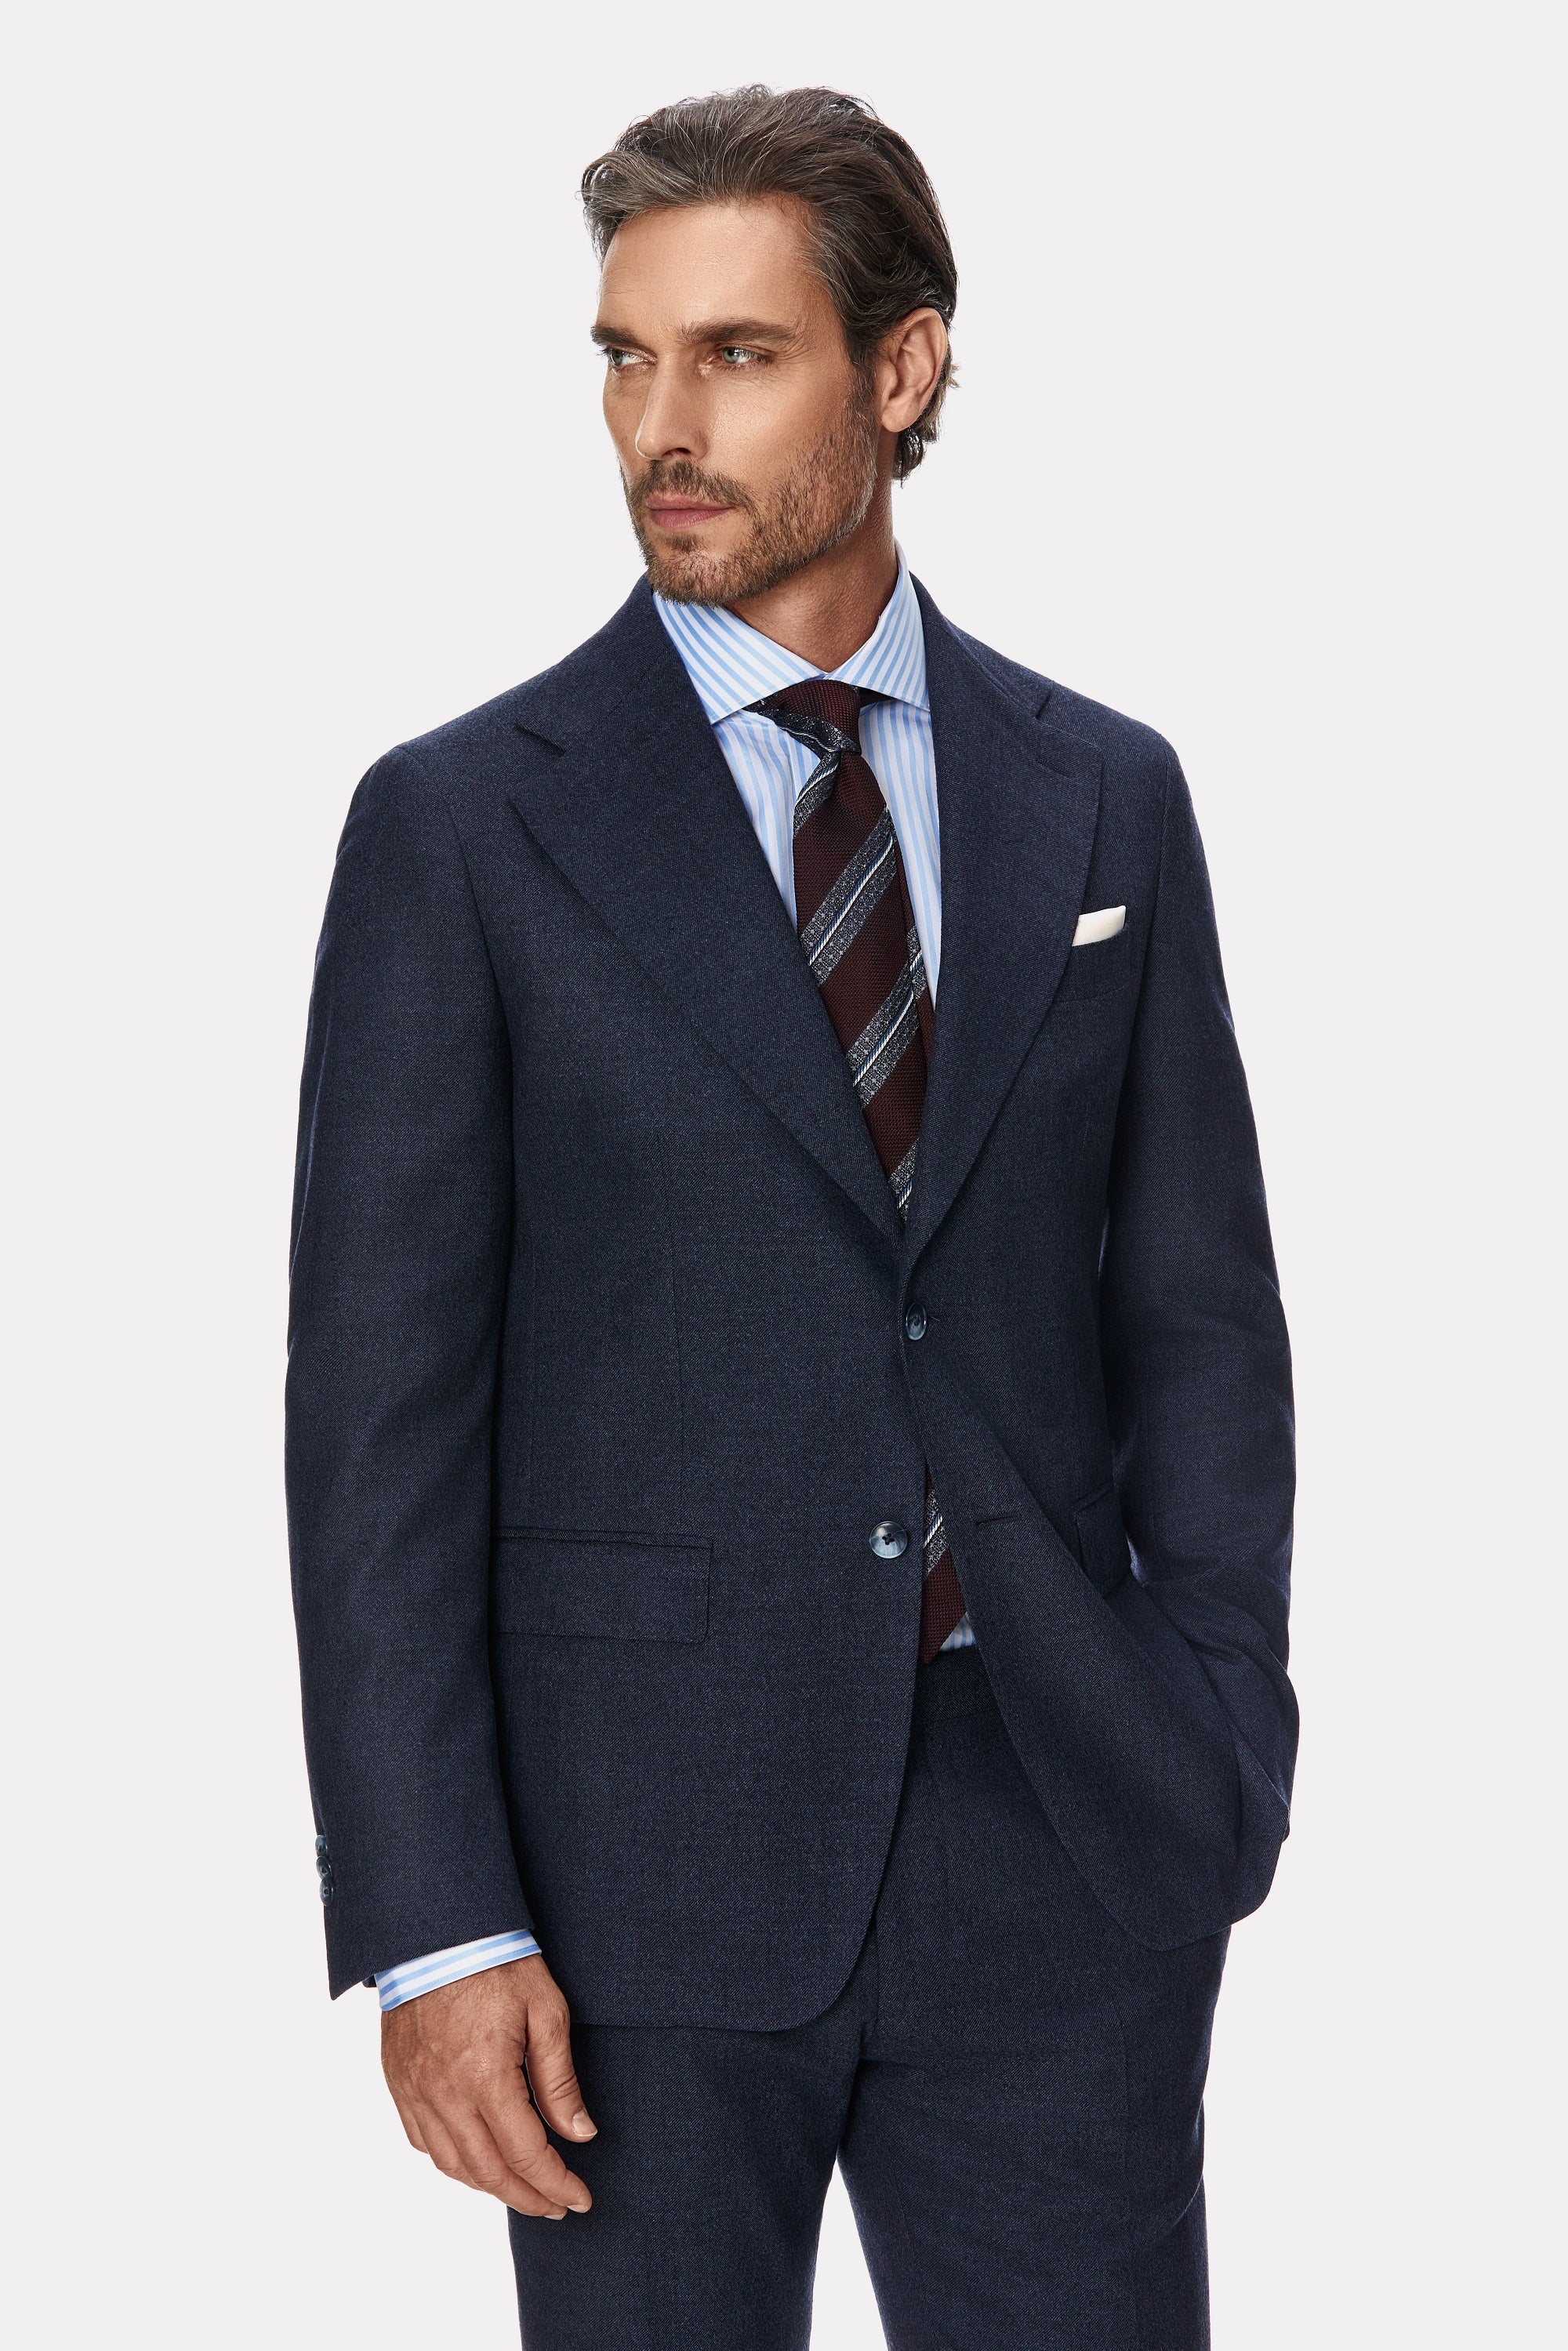 Two-piece navy blue flannel suit, textured